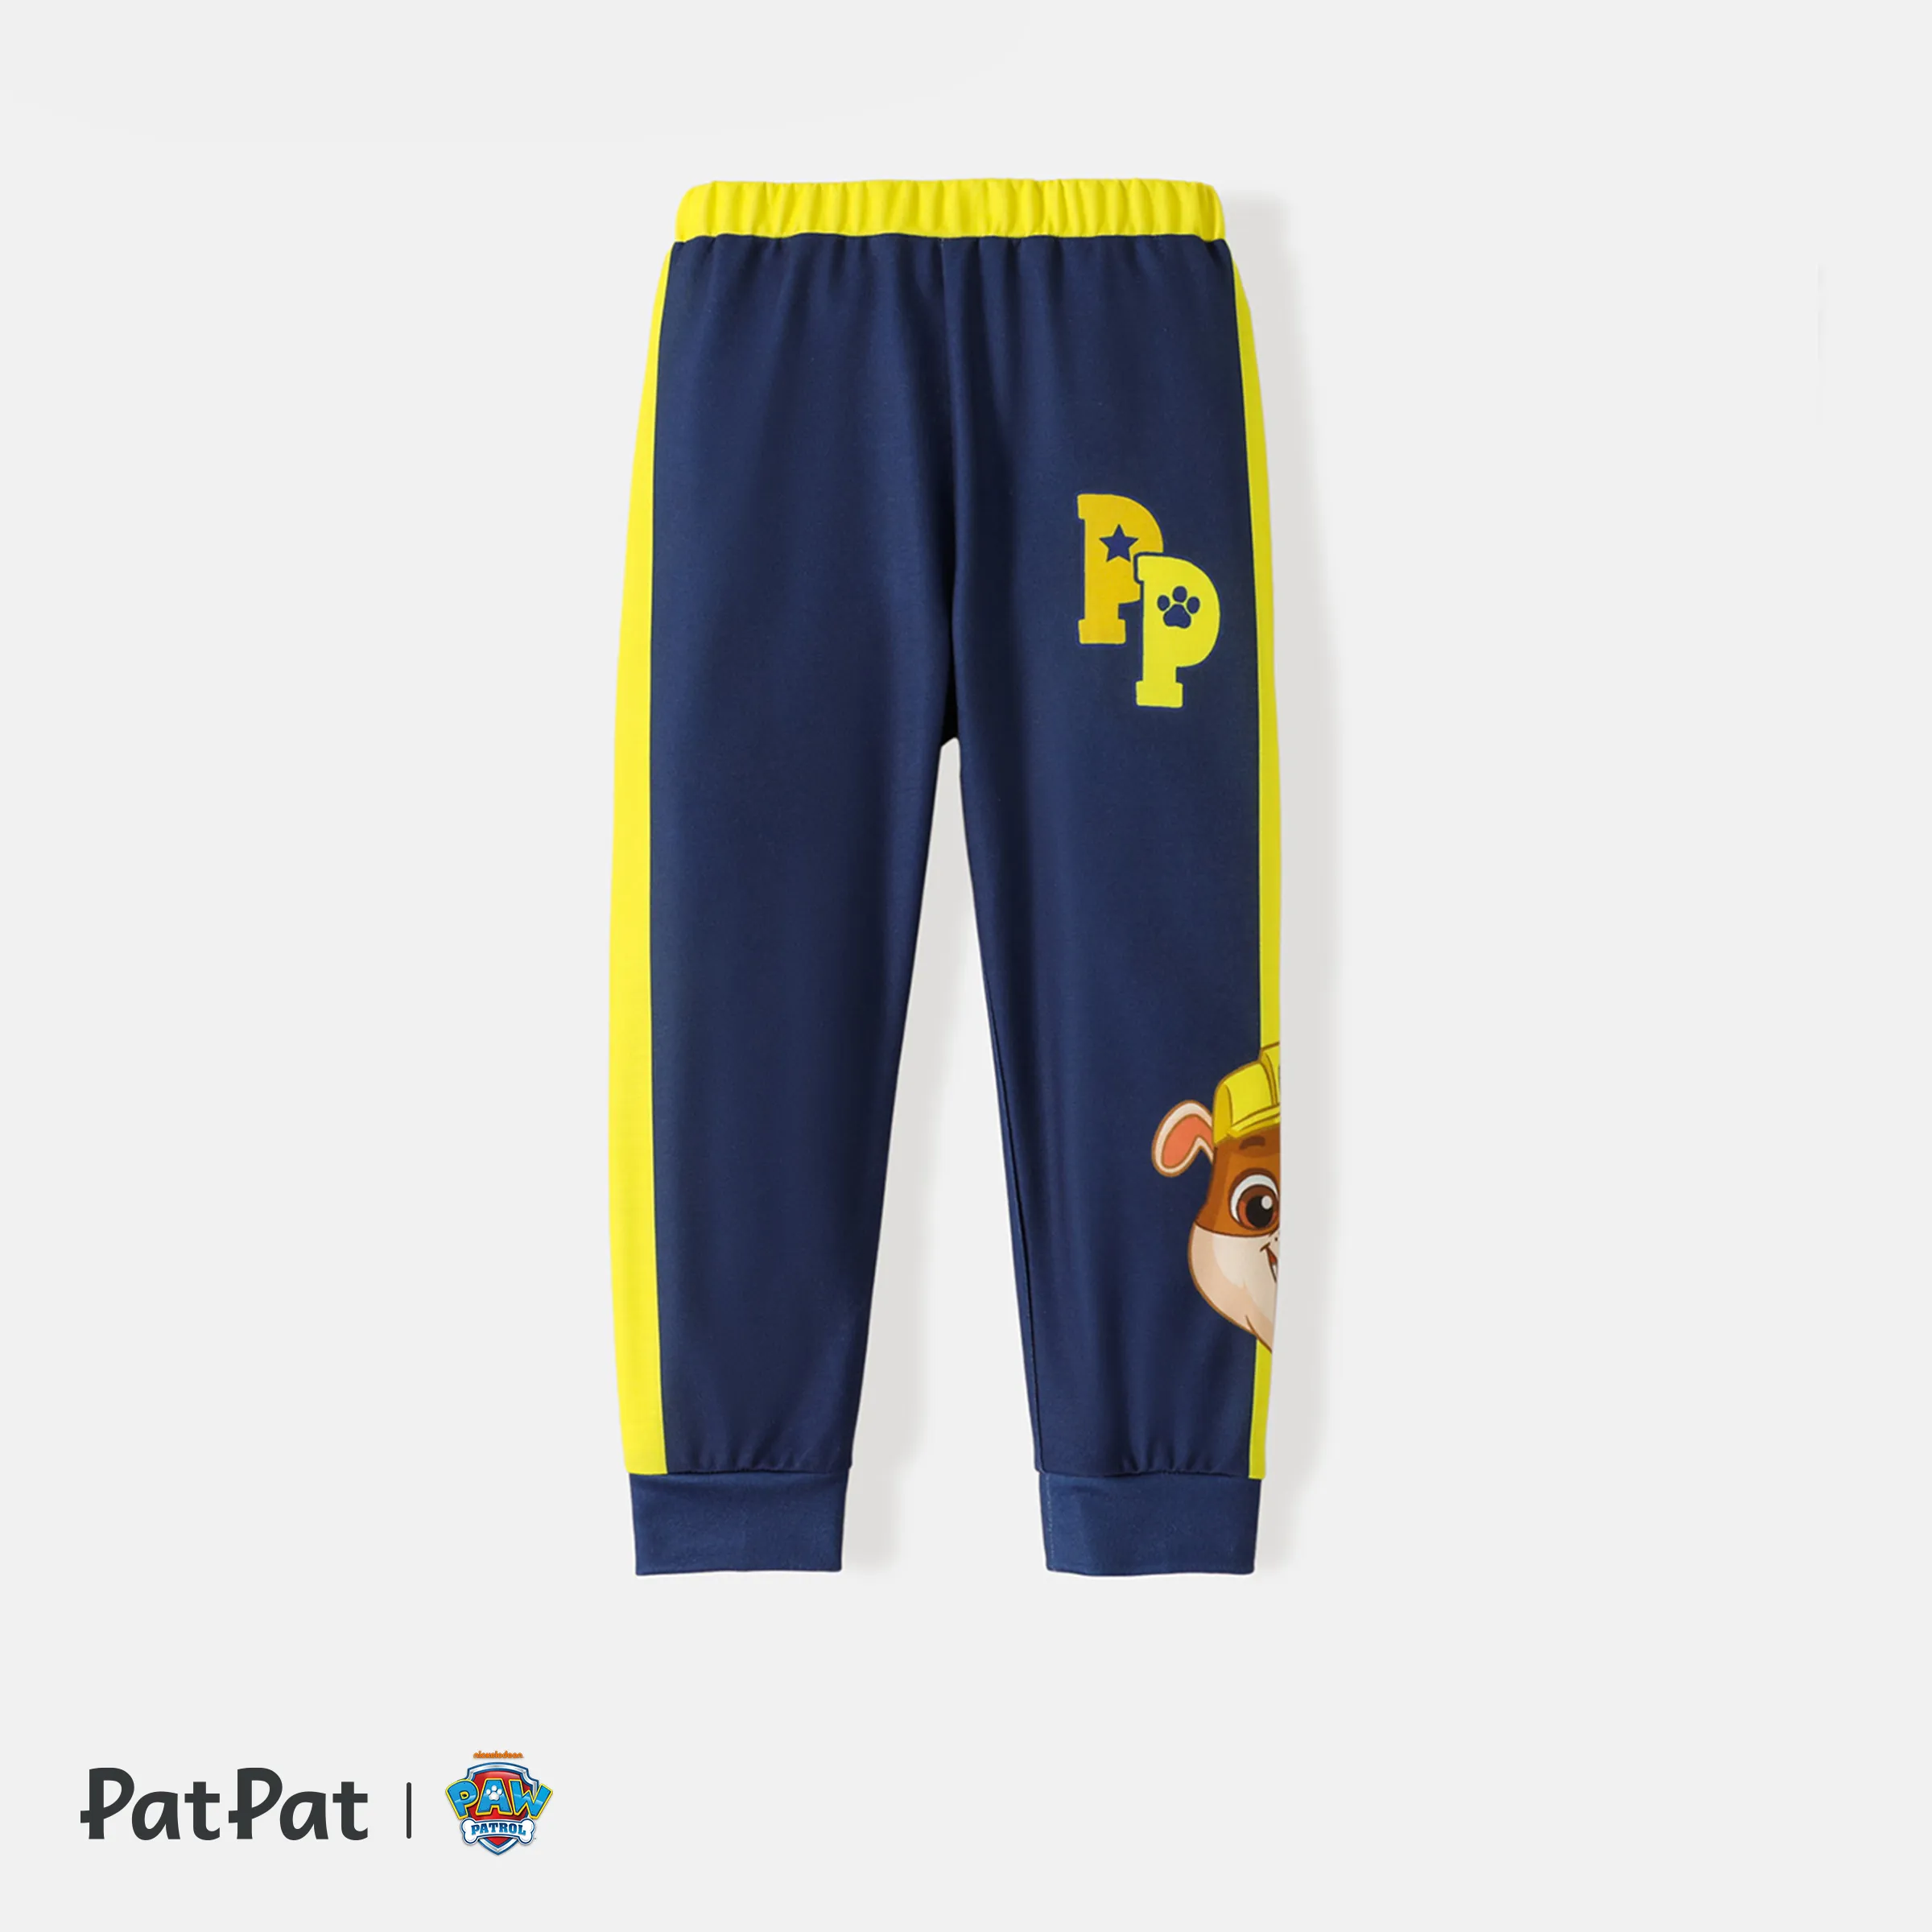 PAW Patrol Toddler Boy/Girl Colorblock Puppy Graphic Sweatpants